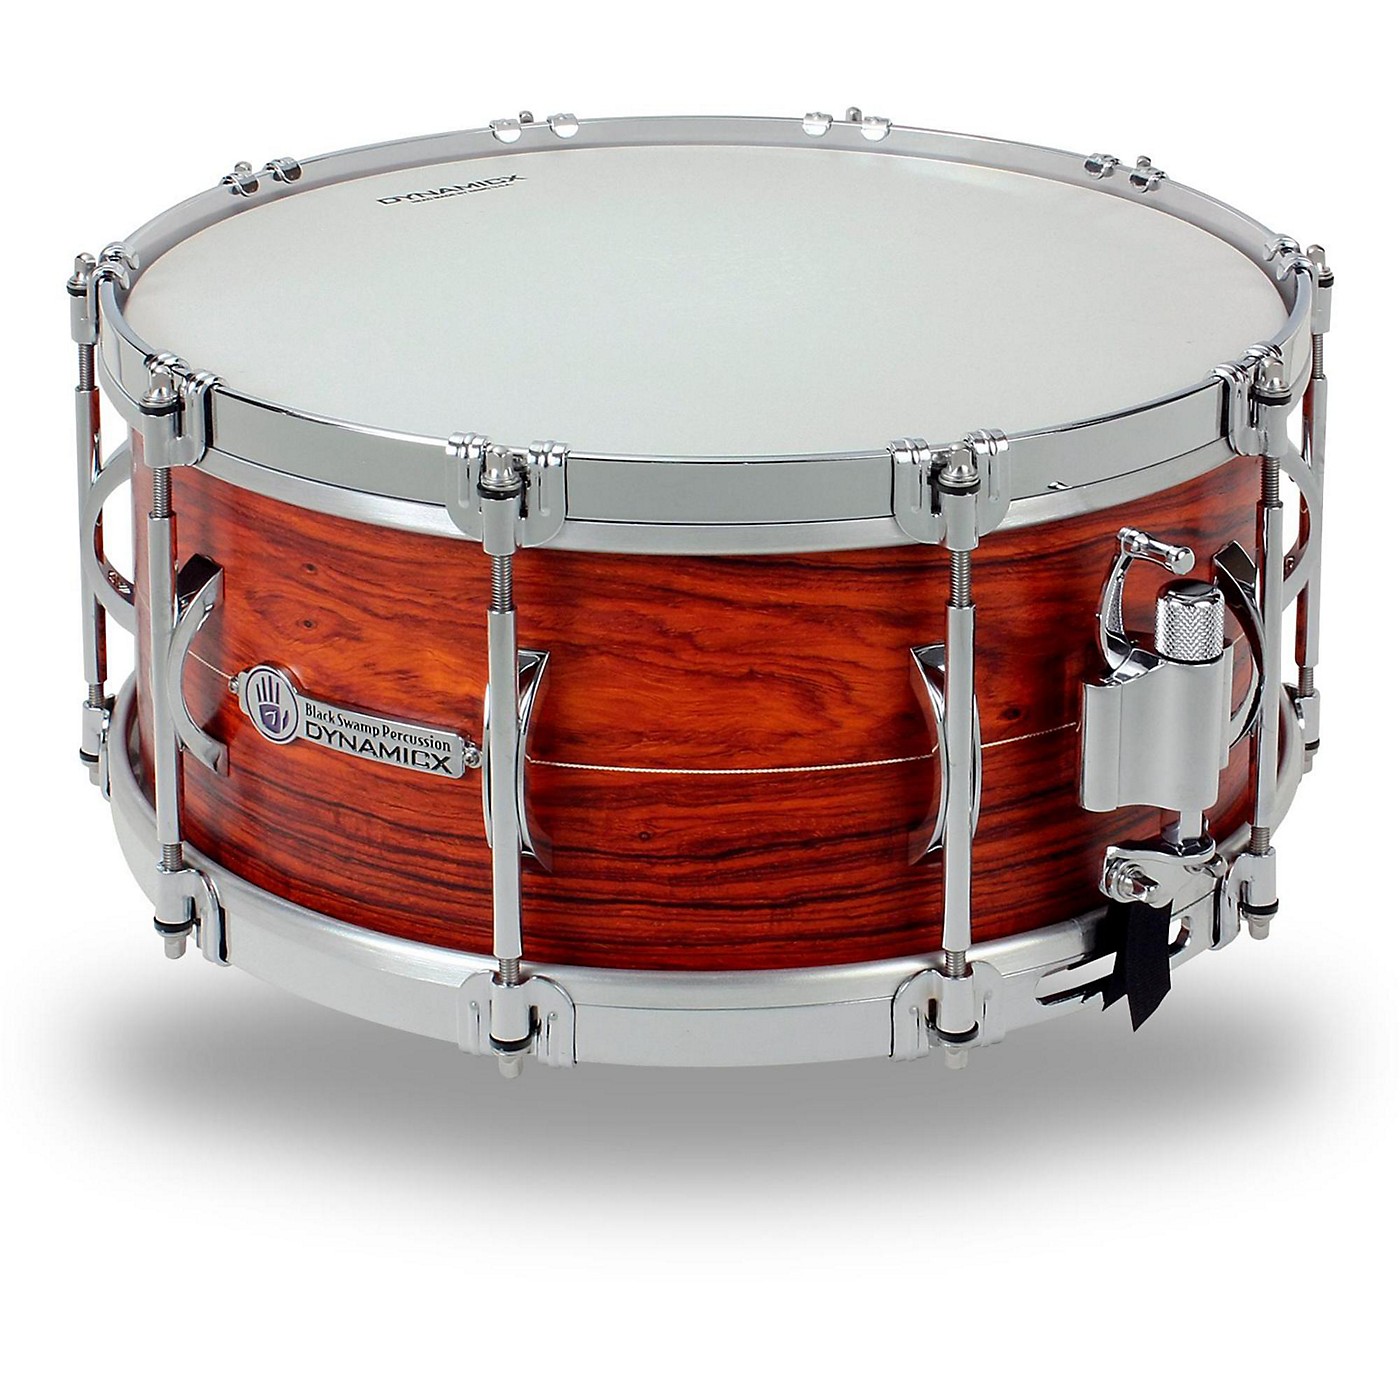 Black Swamp Percussion Dynamicx Sterling Series Series Snare Drum thumbnail